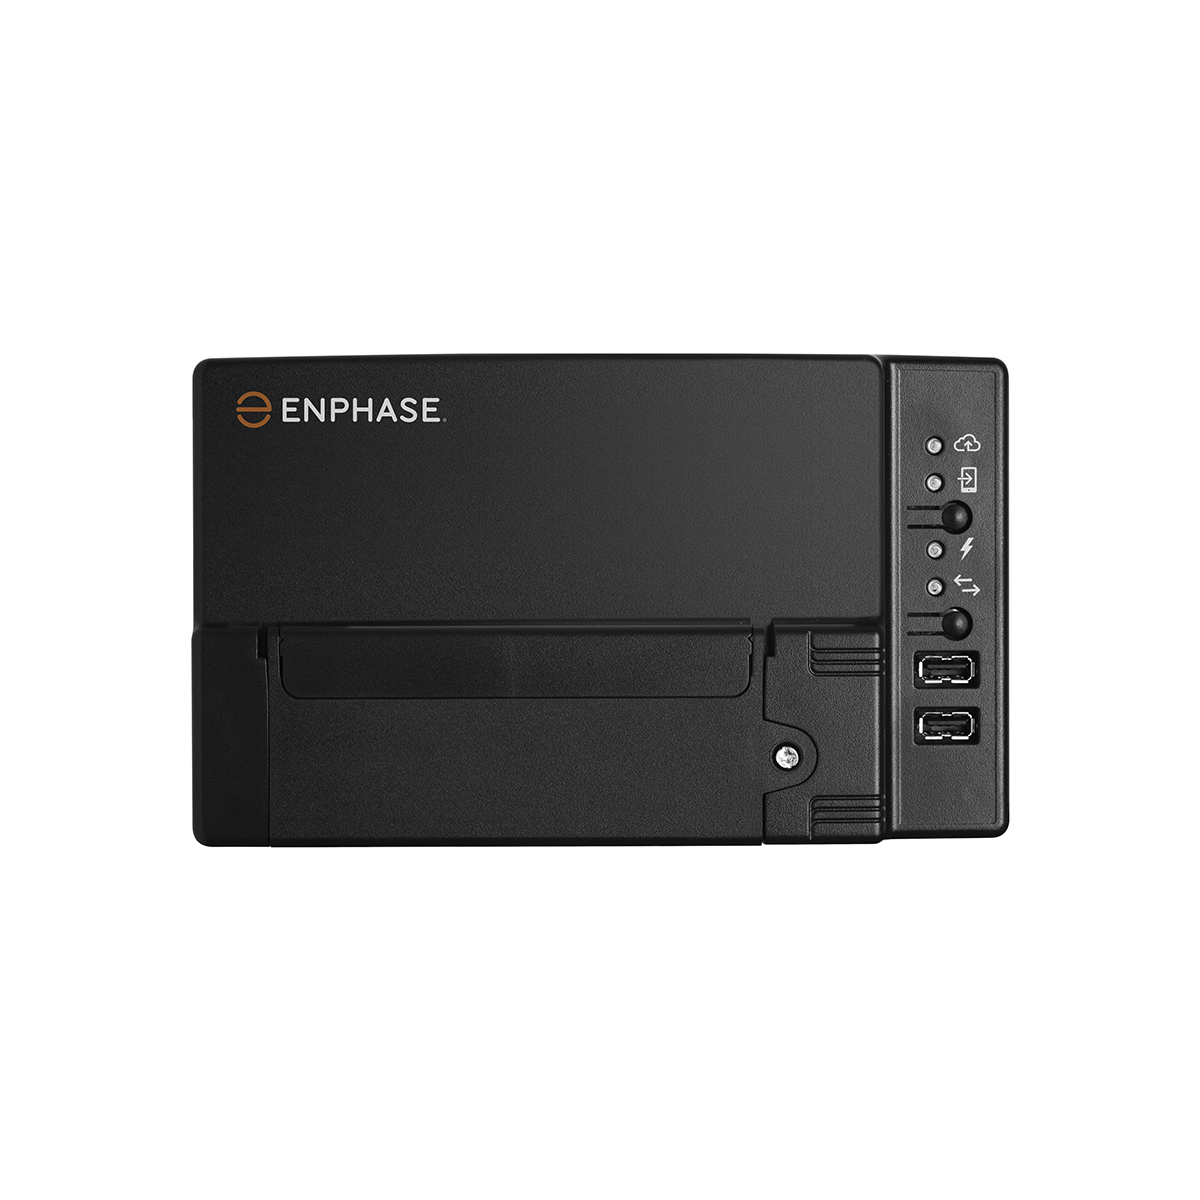 21x Sunpower P6 8505 wp met Enphase IQ8A en Accu 1x N Charge 10T,1 x N Charge 3T